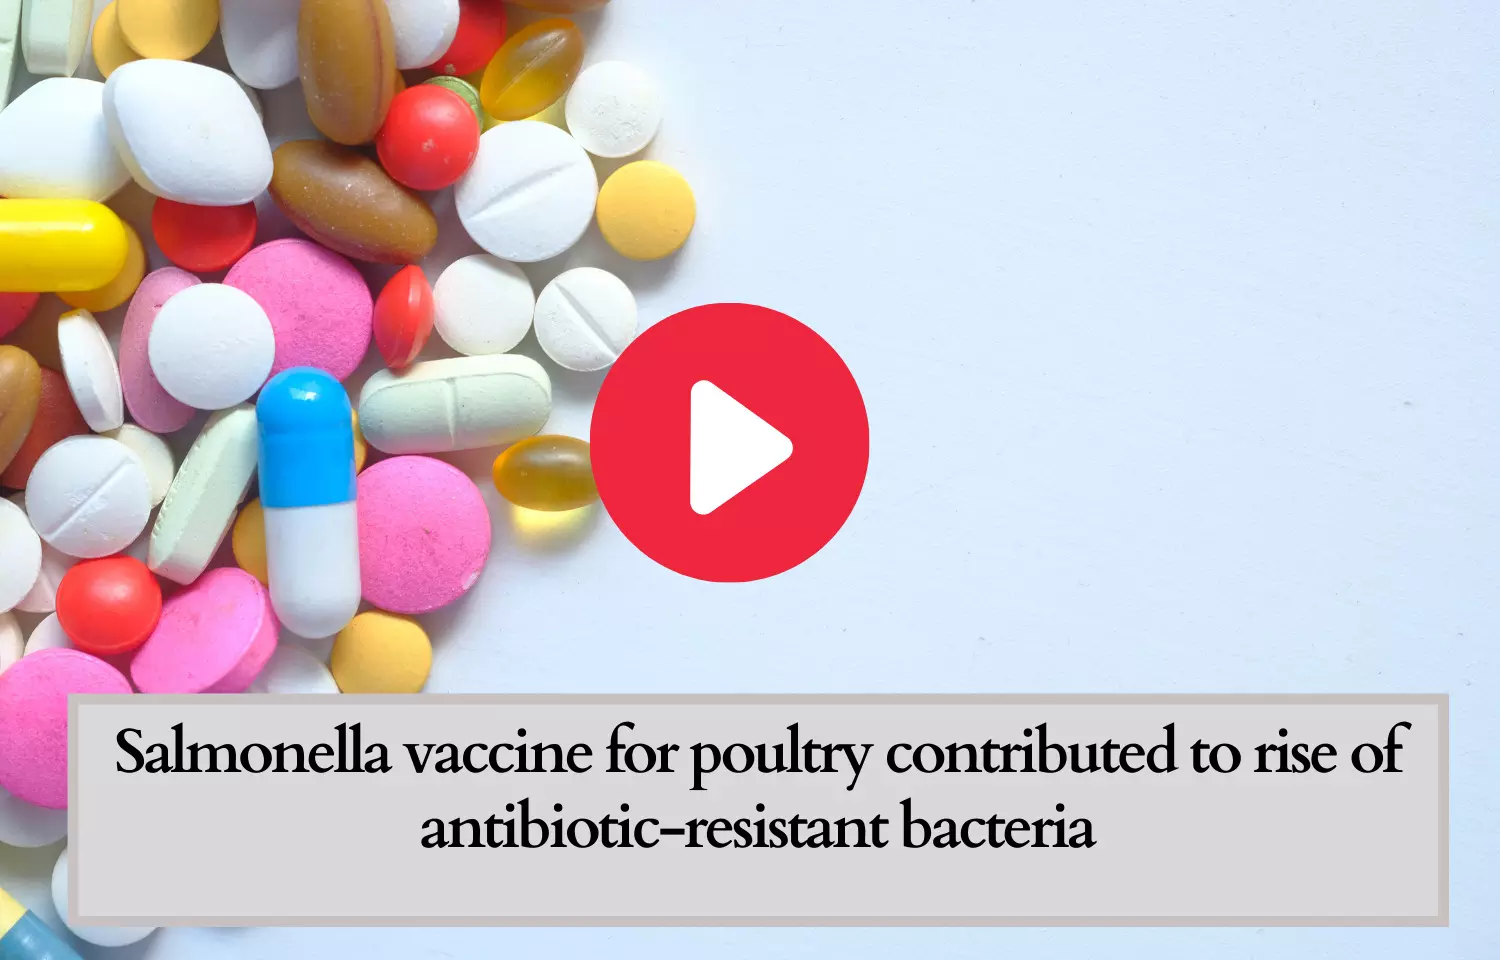 Salmonella vaccine for poultry contributed to rise of antibiotic-resistant bacteria